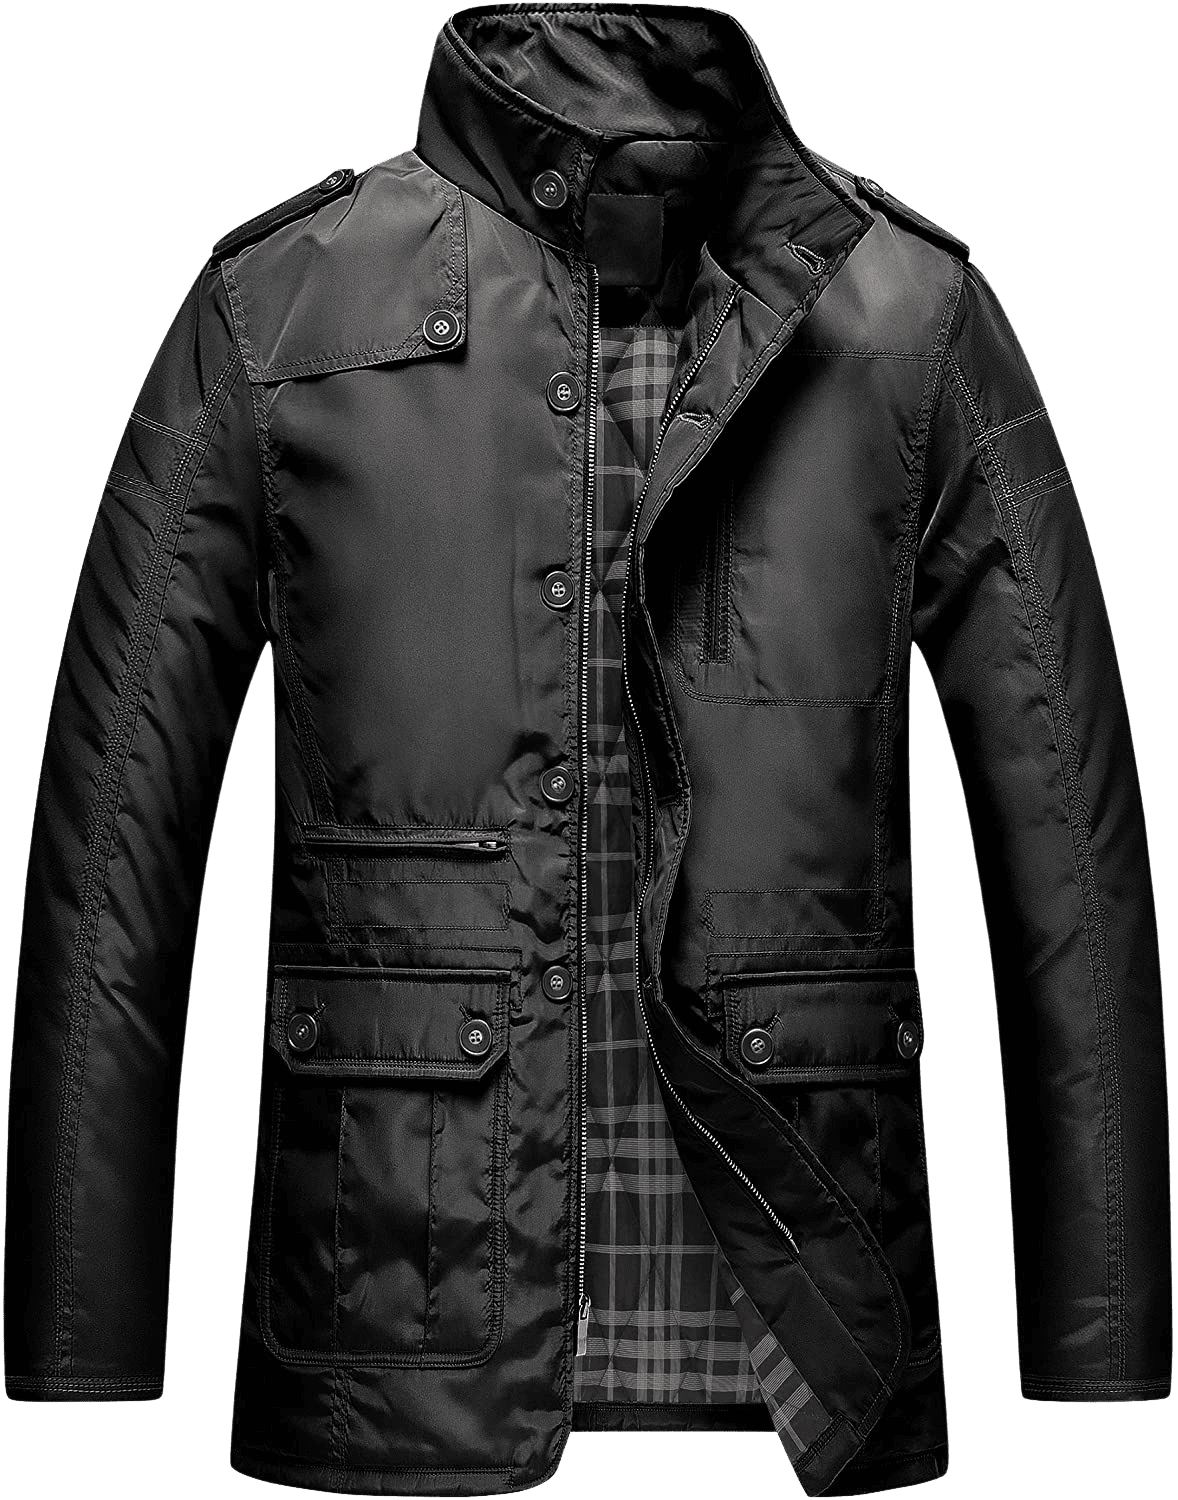 Men's Winter Warm Jacket Water Resistant Windbreak Thicken Cotton Work Coat Stand Collar Outerwear - Home Decor Gifts and More